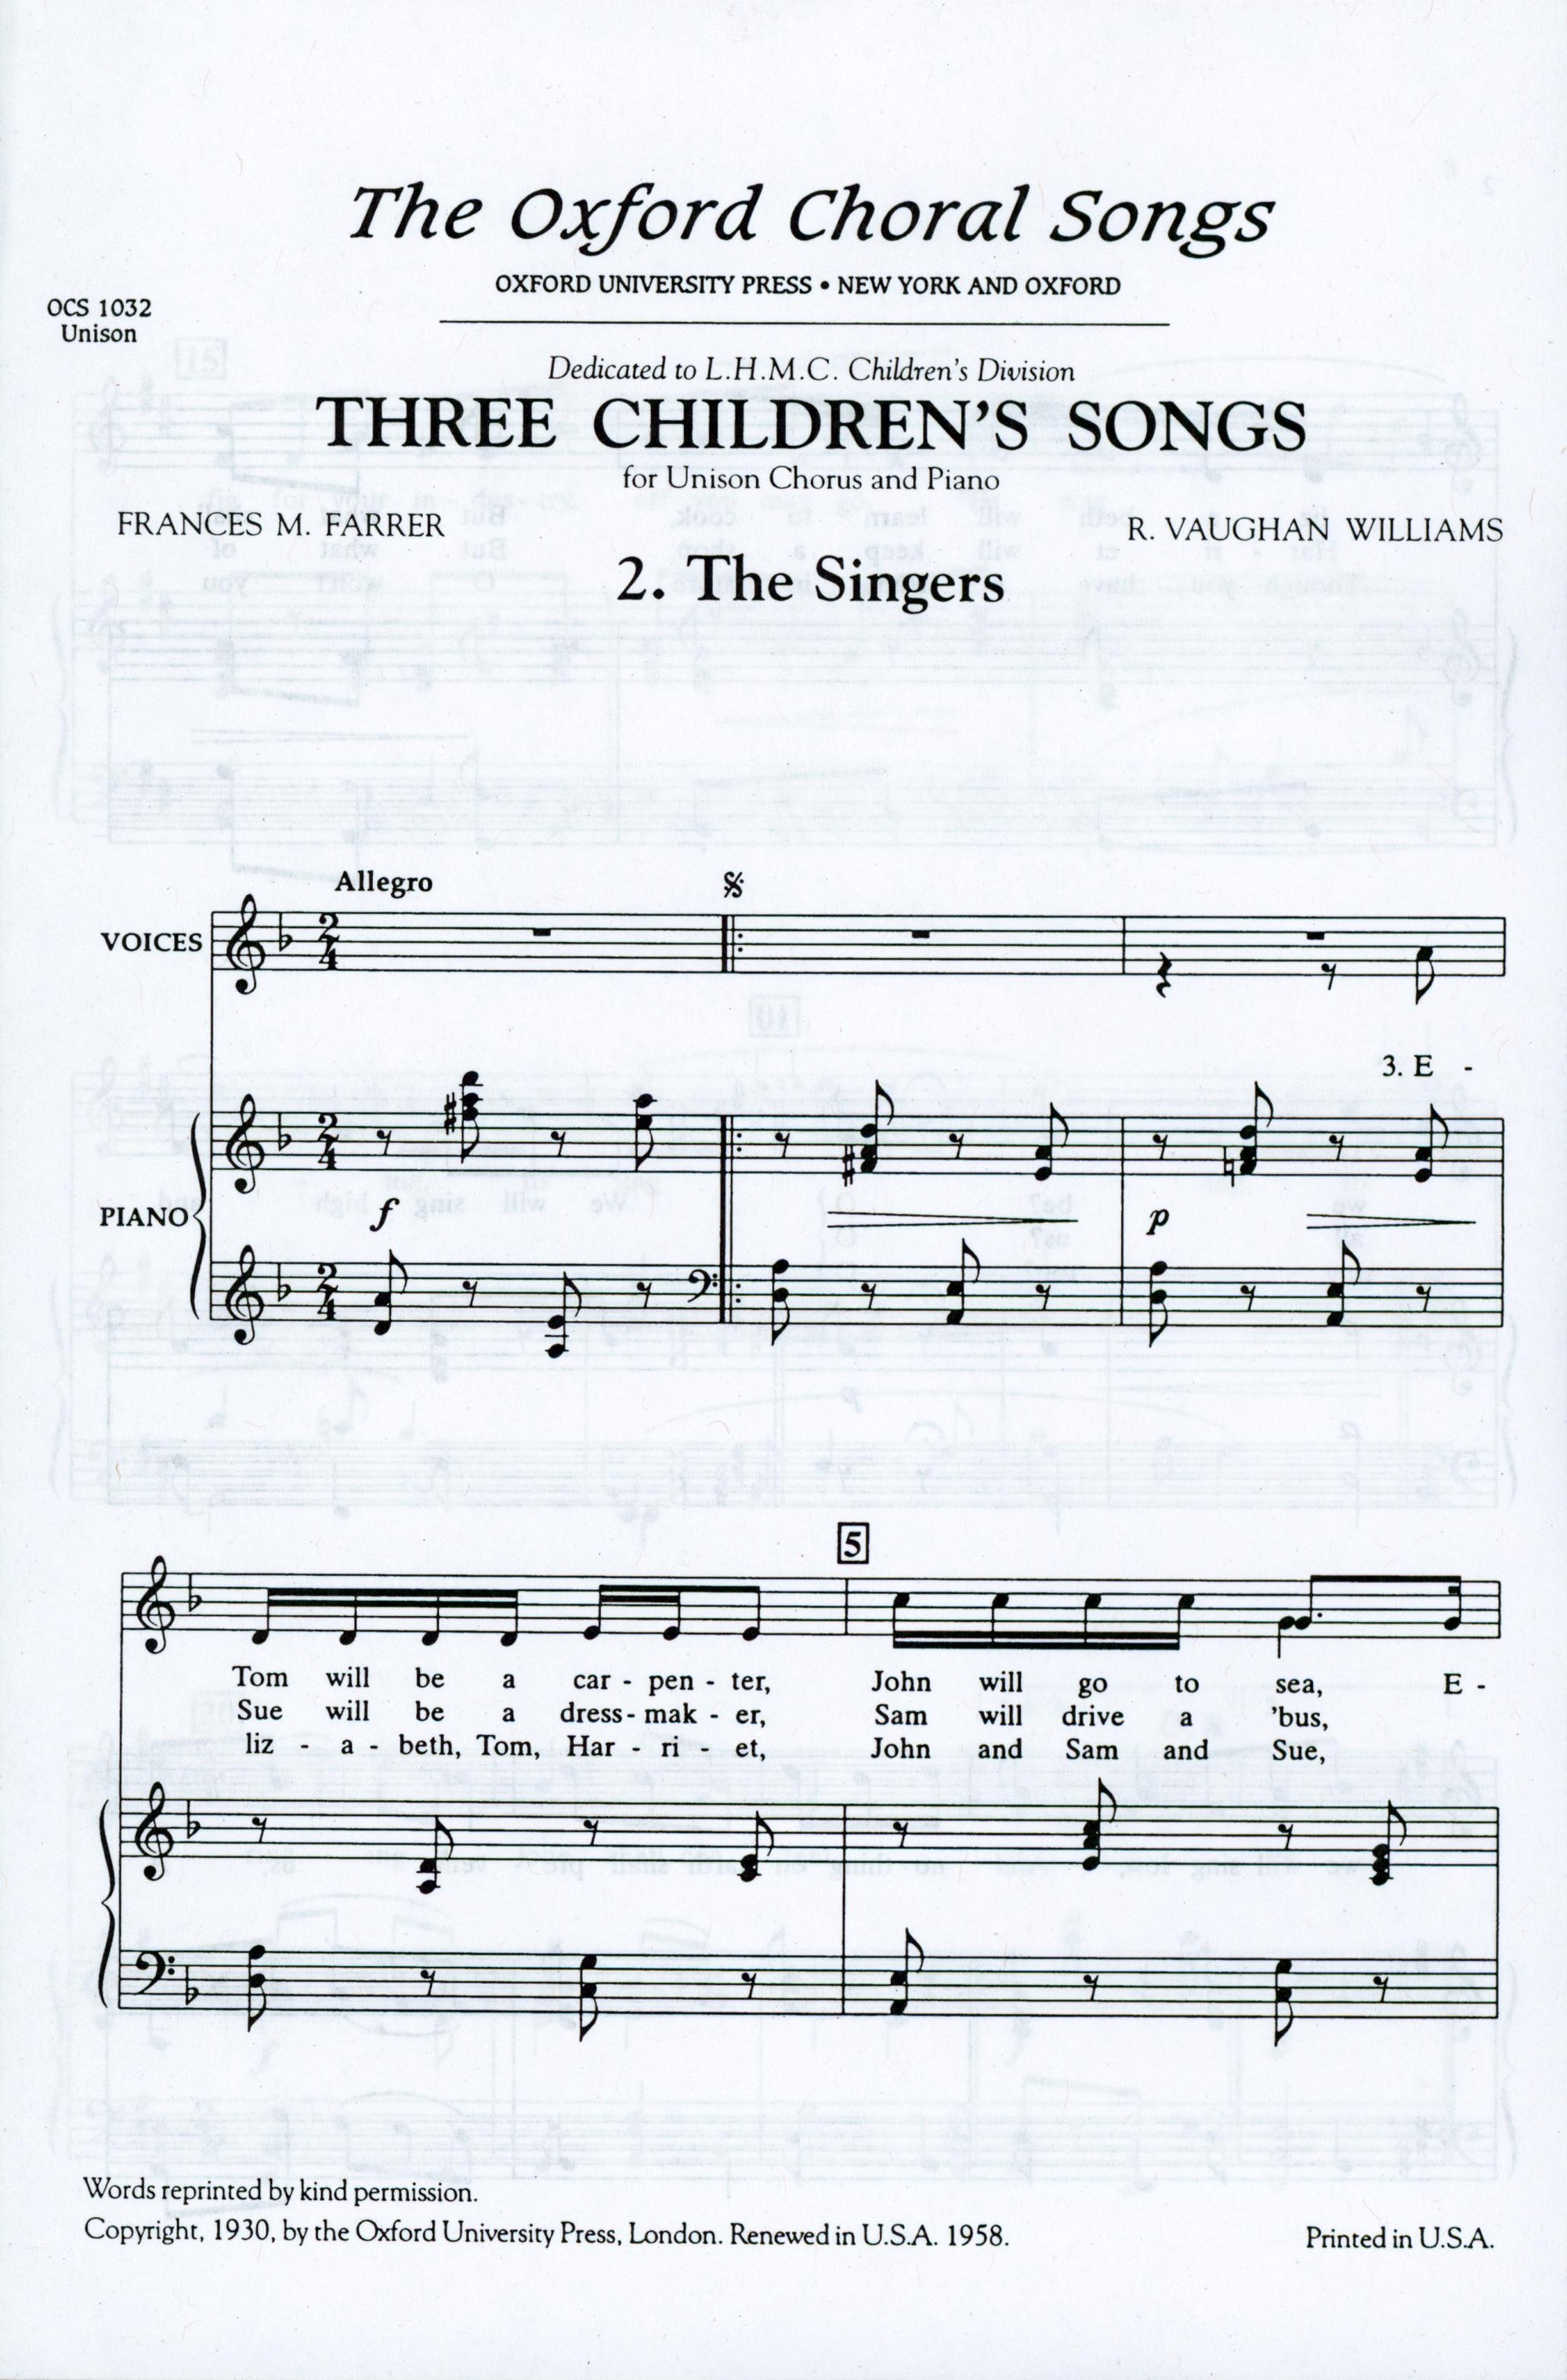 Vaughan Williams: The Singers from 3 Children's Songs